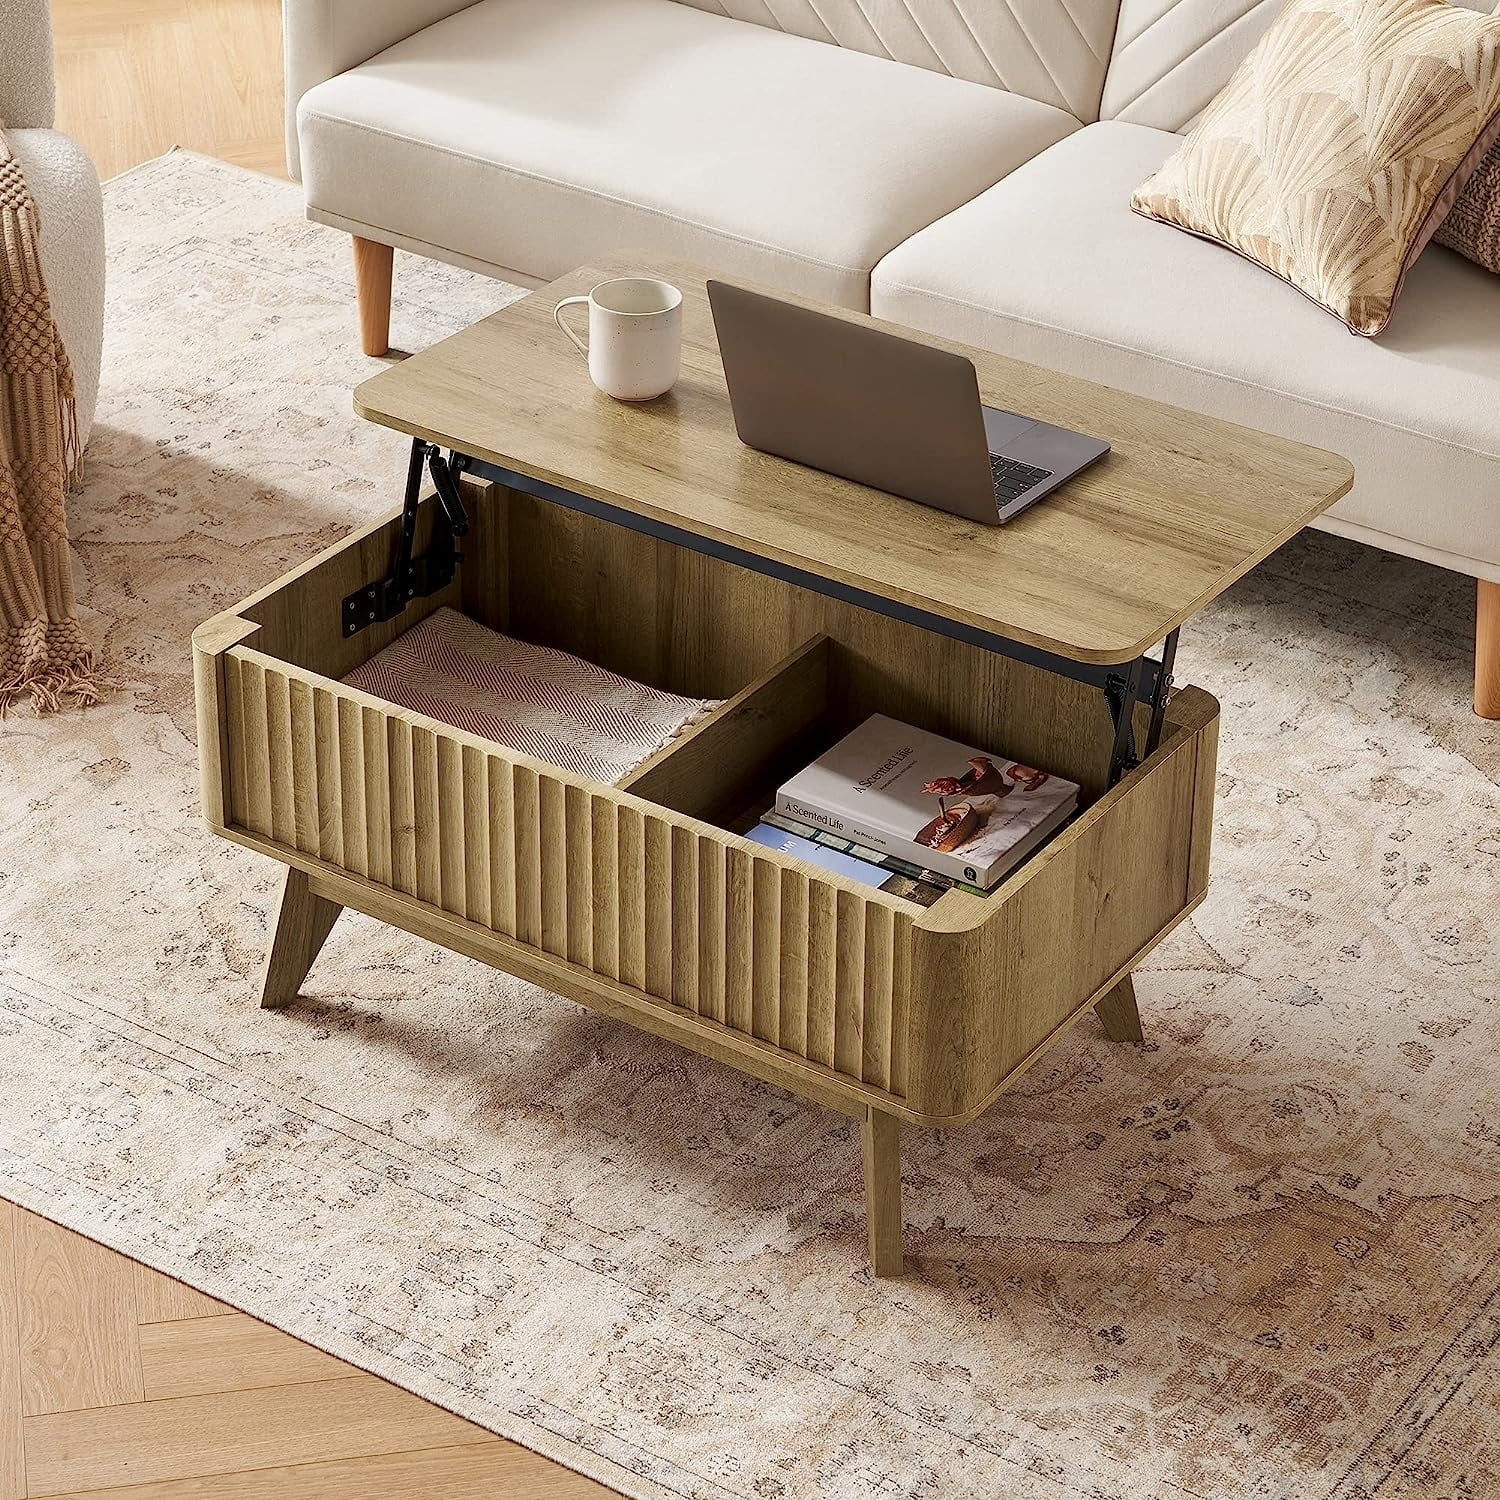 Mopio Brooklyn Mid-Century Modern Lift Top Coffee Table with Storage for Living Waveform Panel -